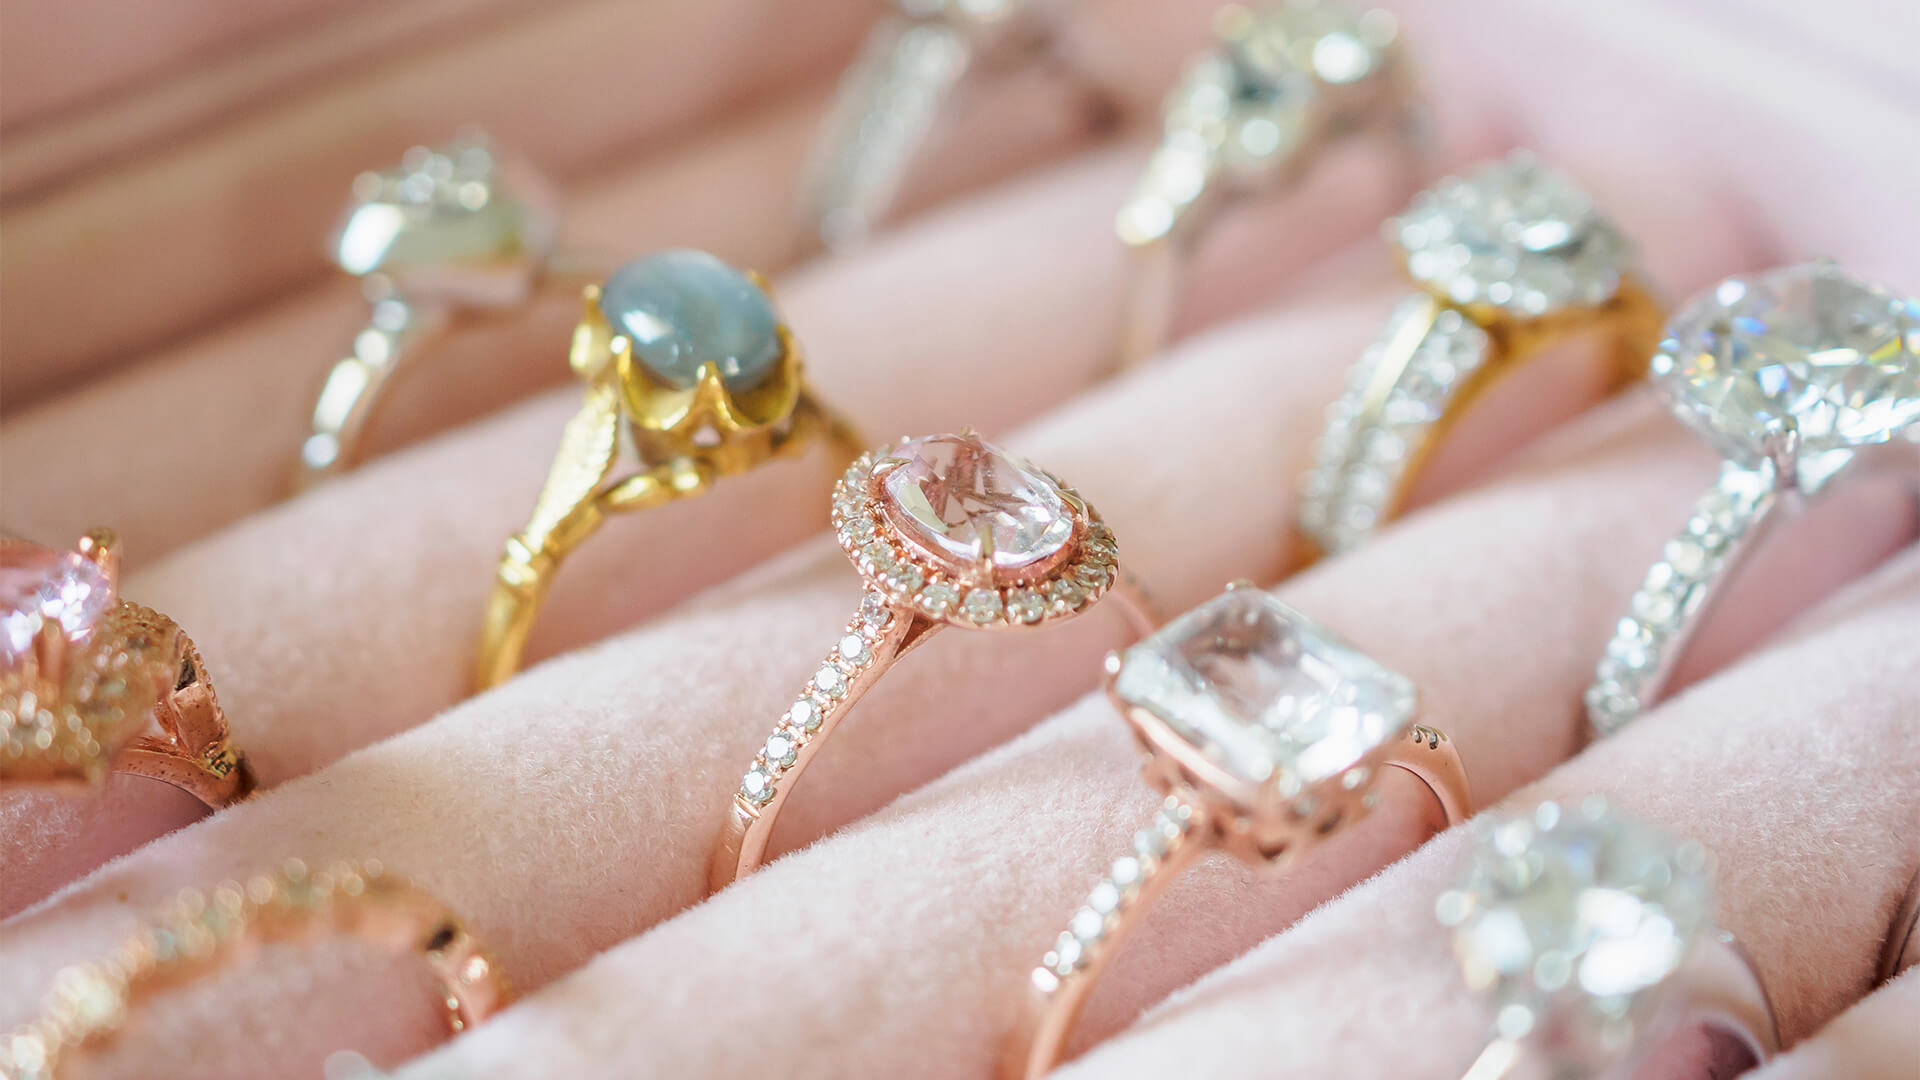 A collection of gold, silver, and rose gold rings in a pink jewellery box